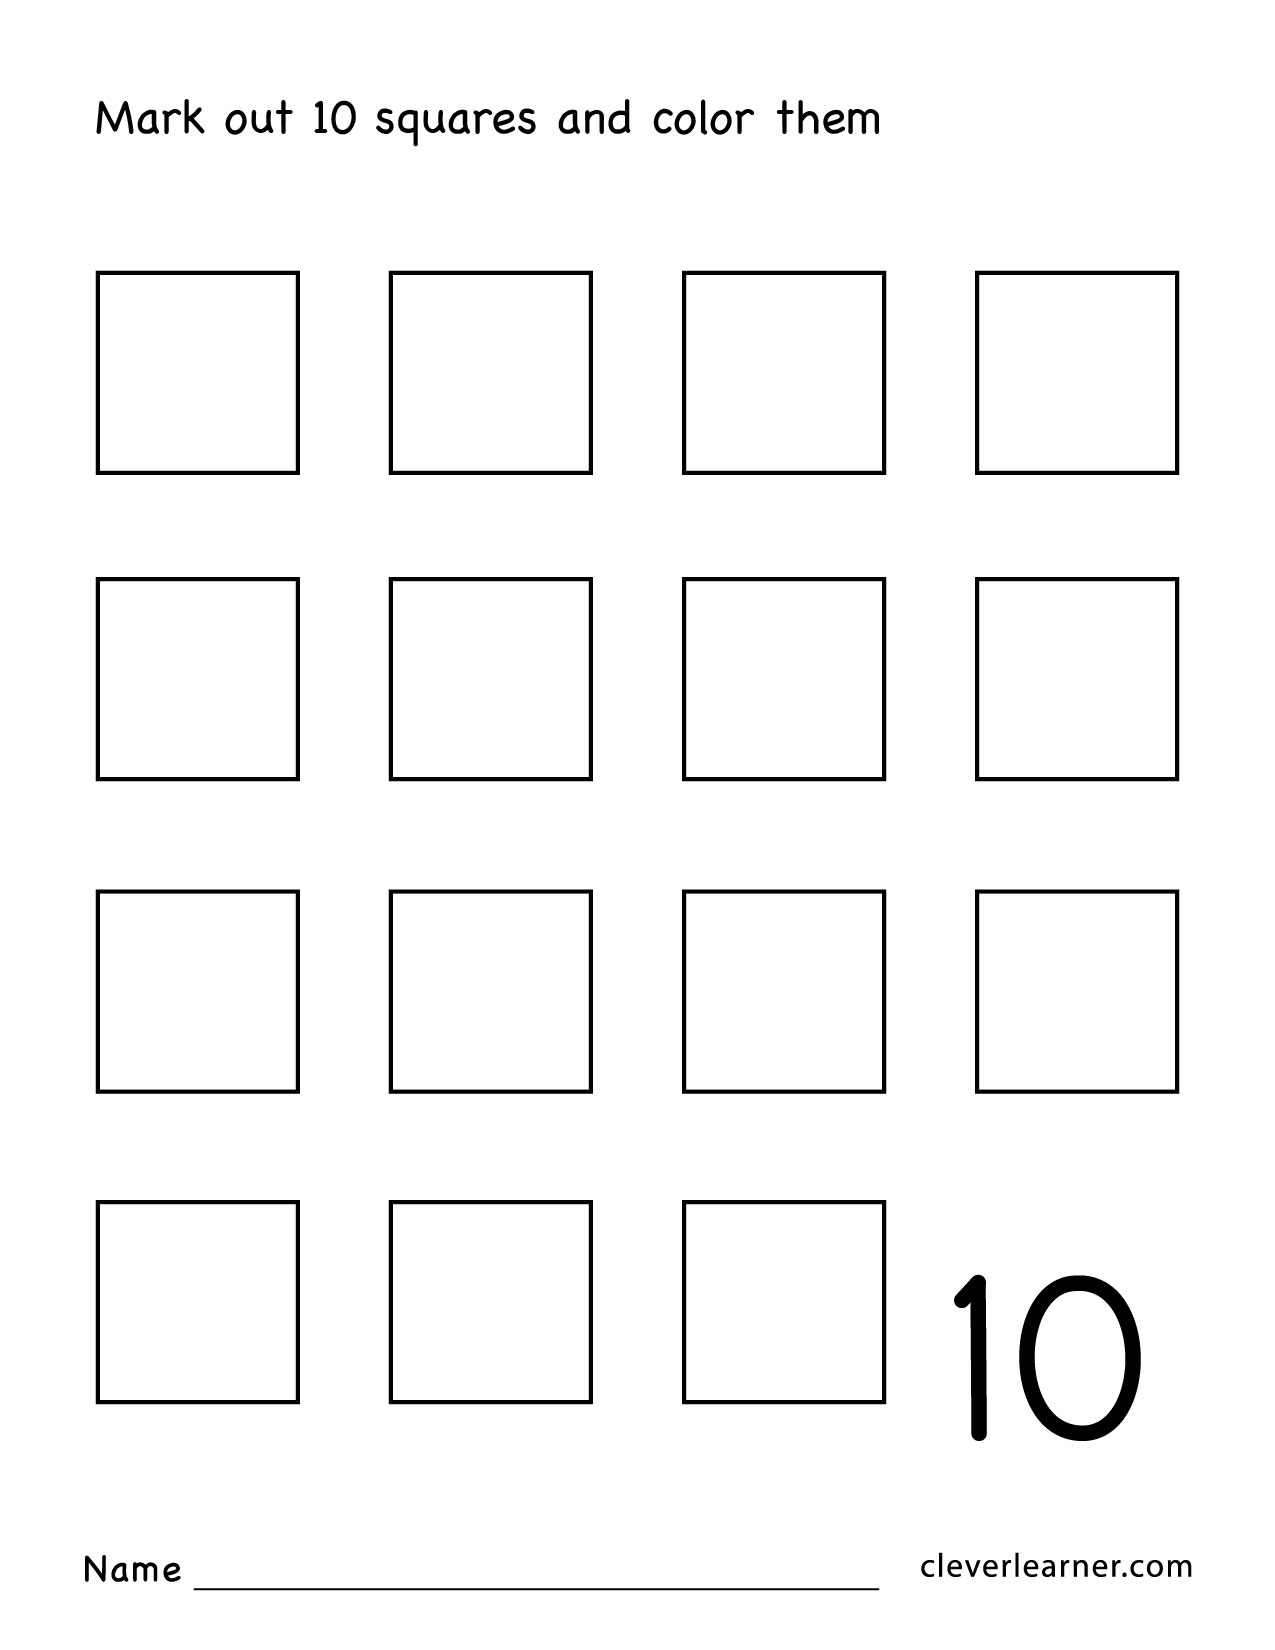 number-ten-writing-counting-and-identification-printable-worksheets